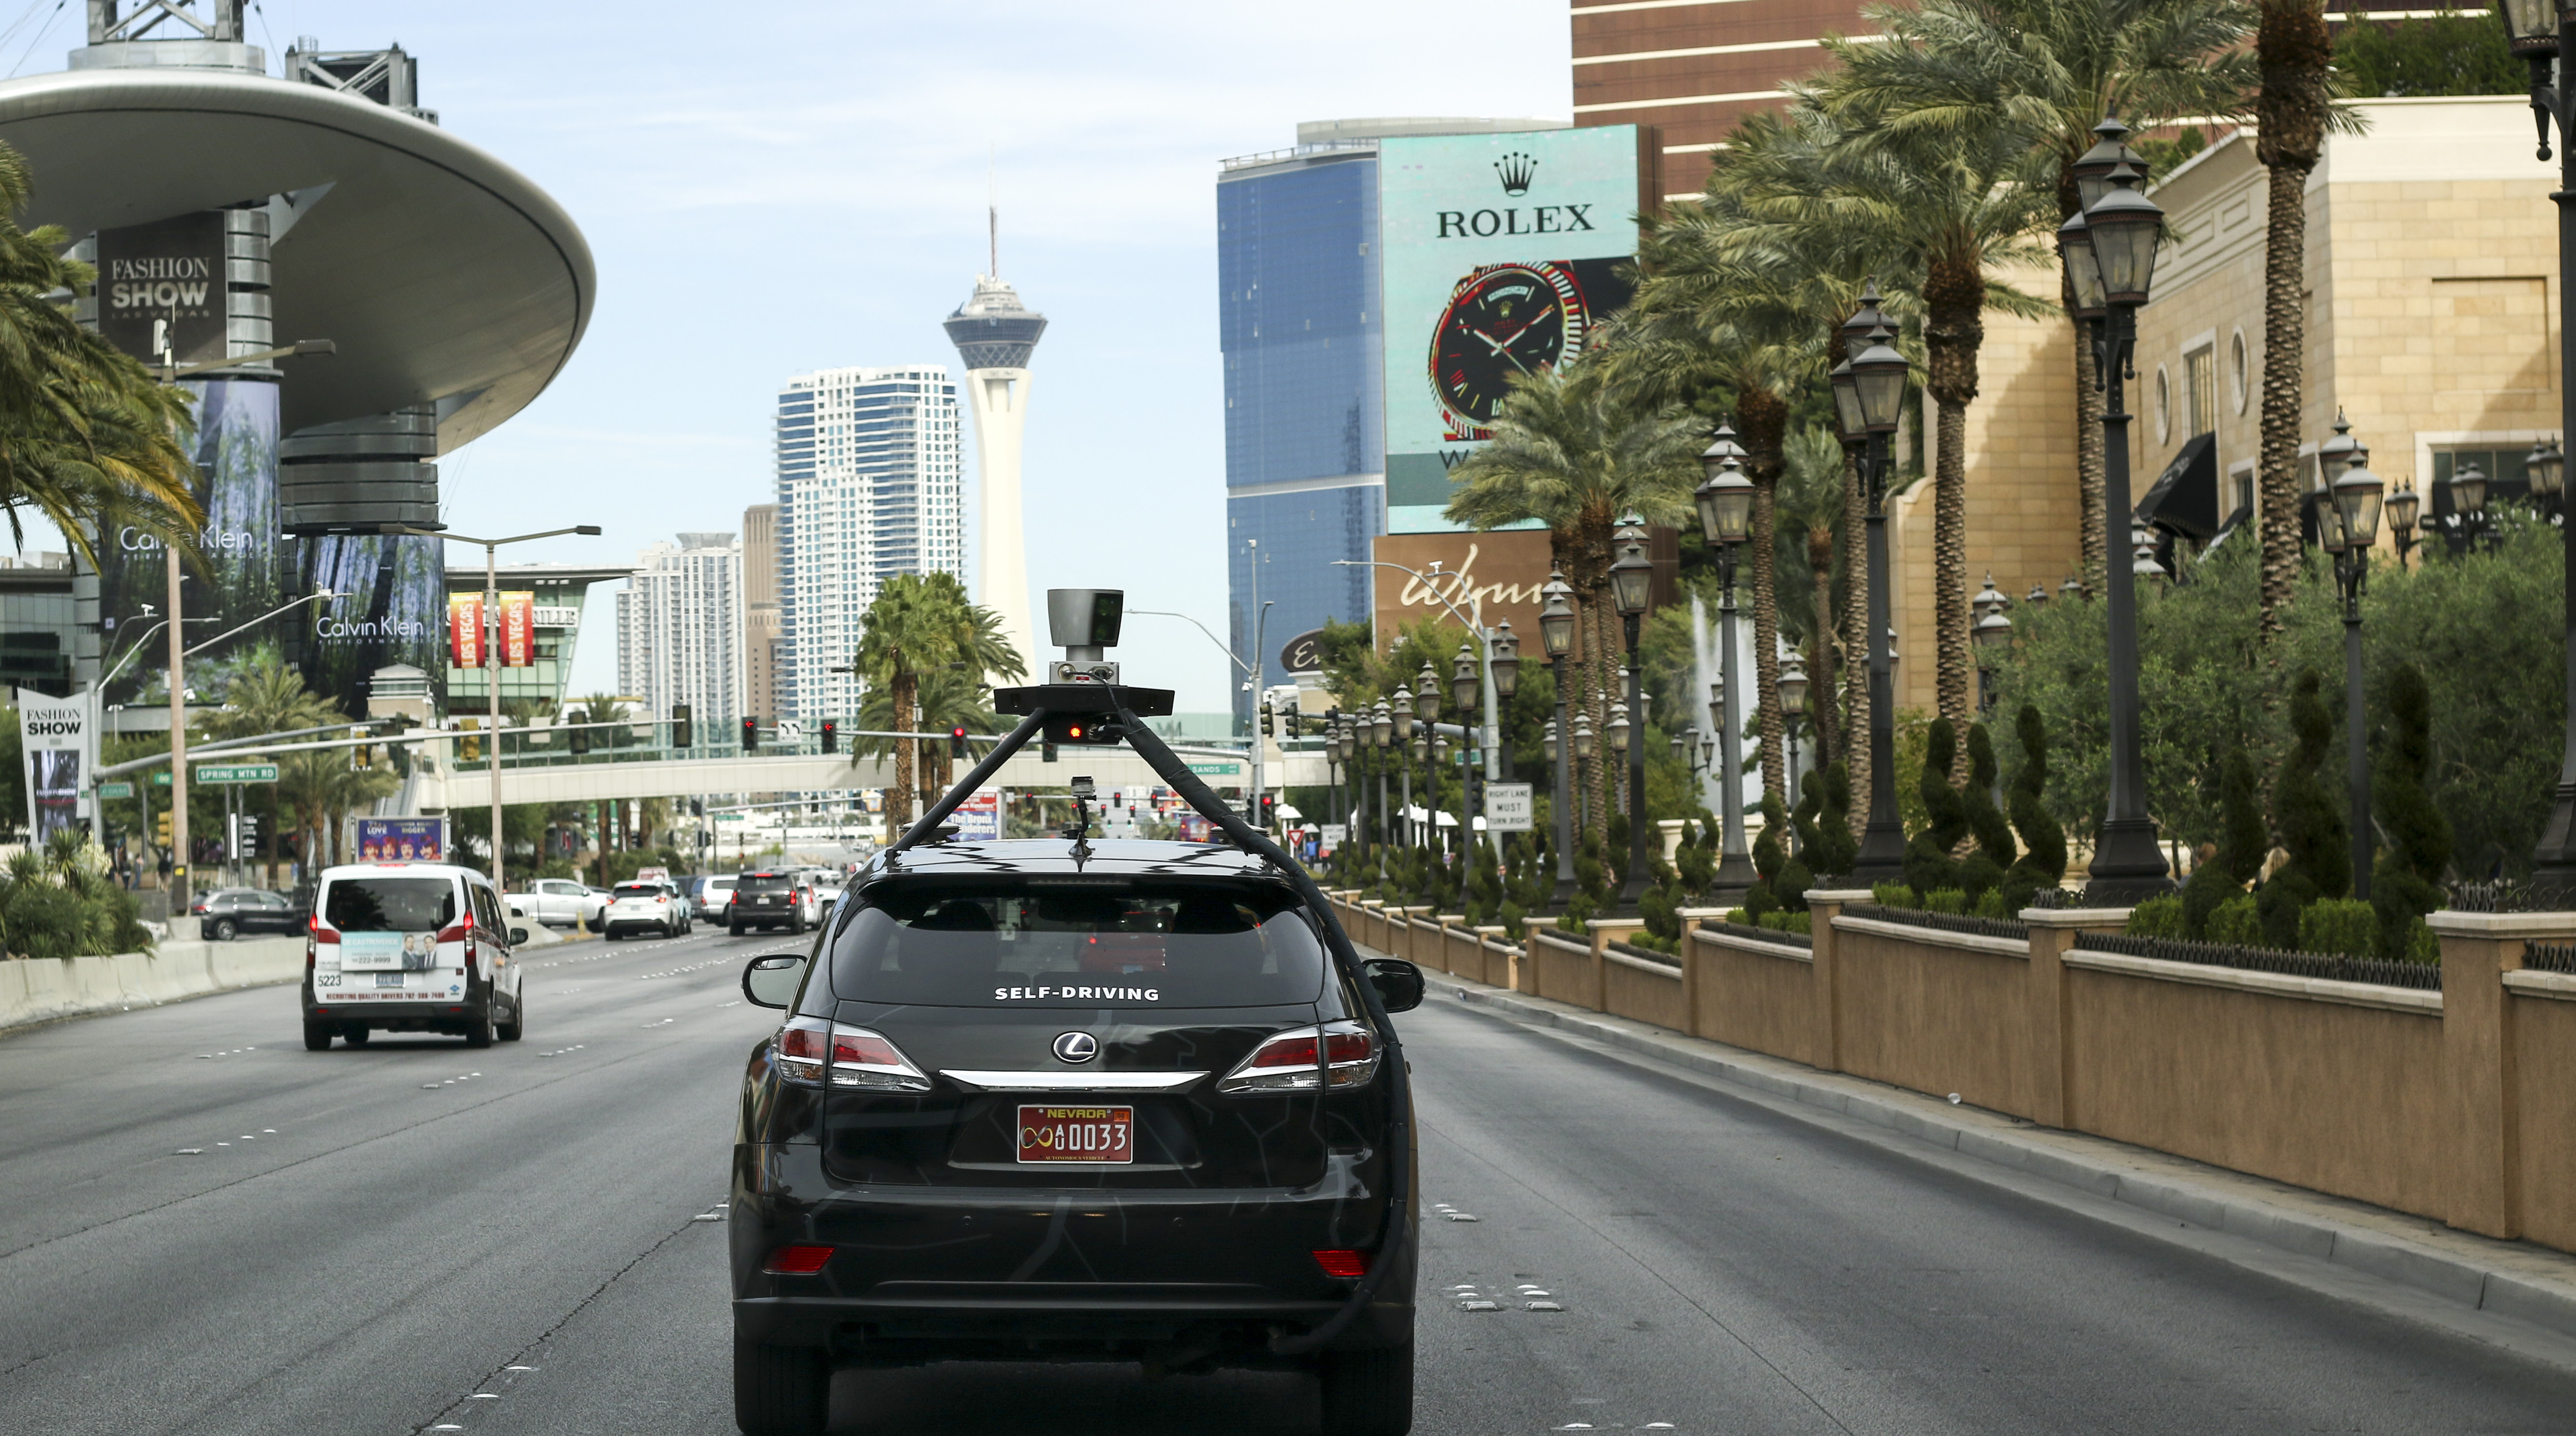 AAA will test Torc’s self-driving cars to build out safety criteria